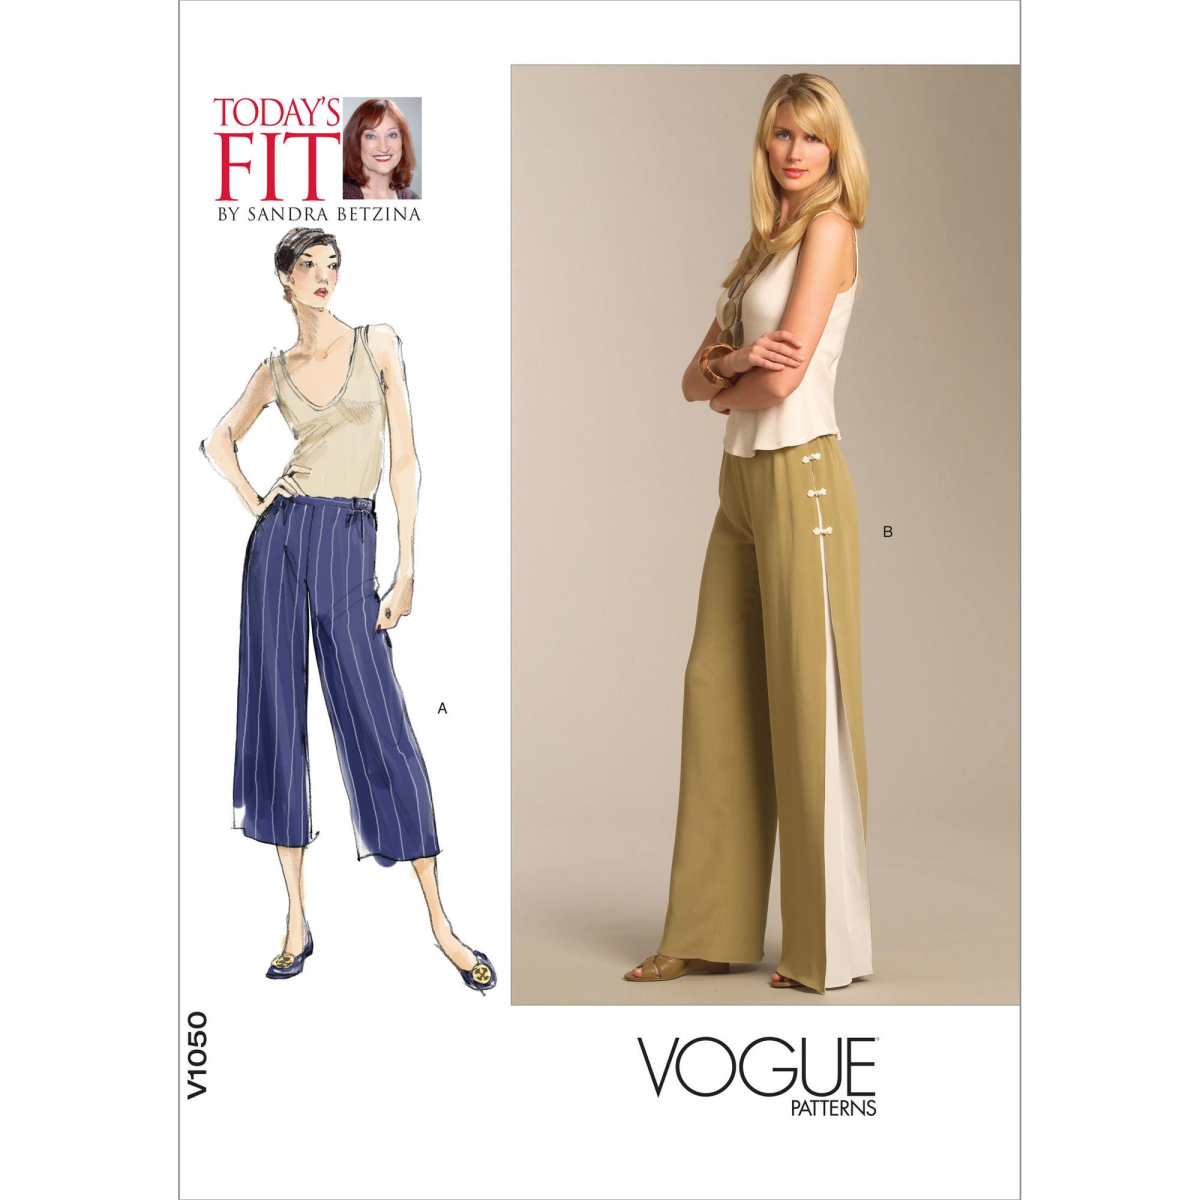 Vogue V8263 Lsdies Jacket Shorts Trousers Sewing Pattern NEW Size 6-12 |  eBay